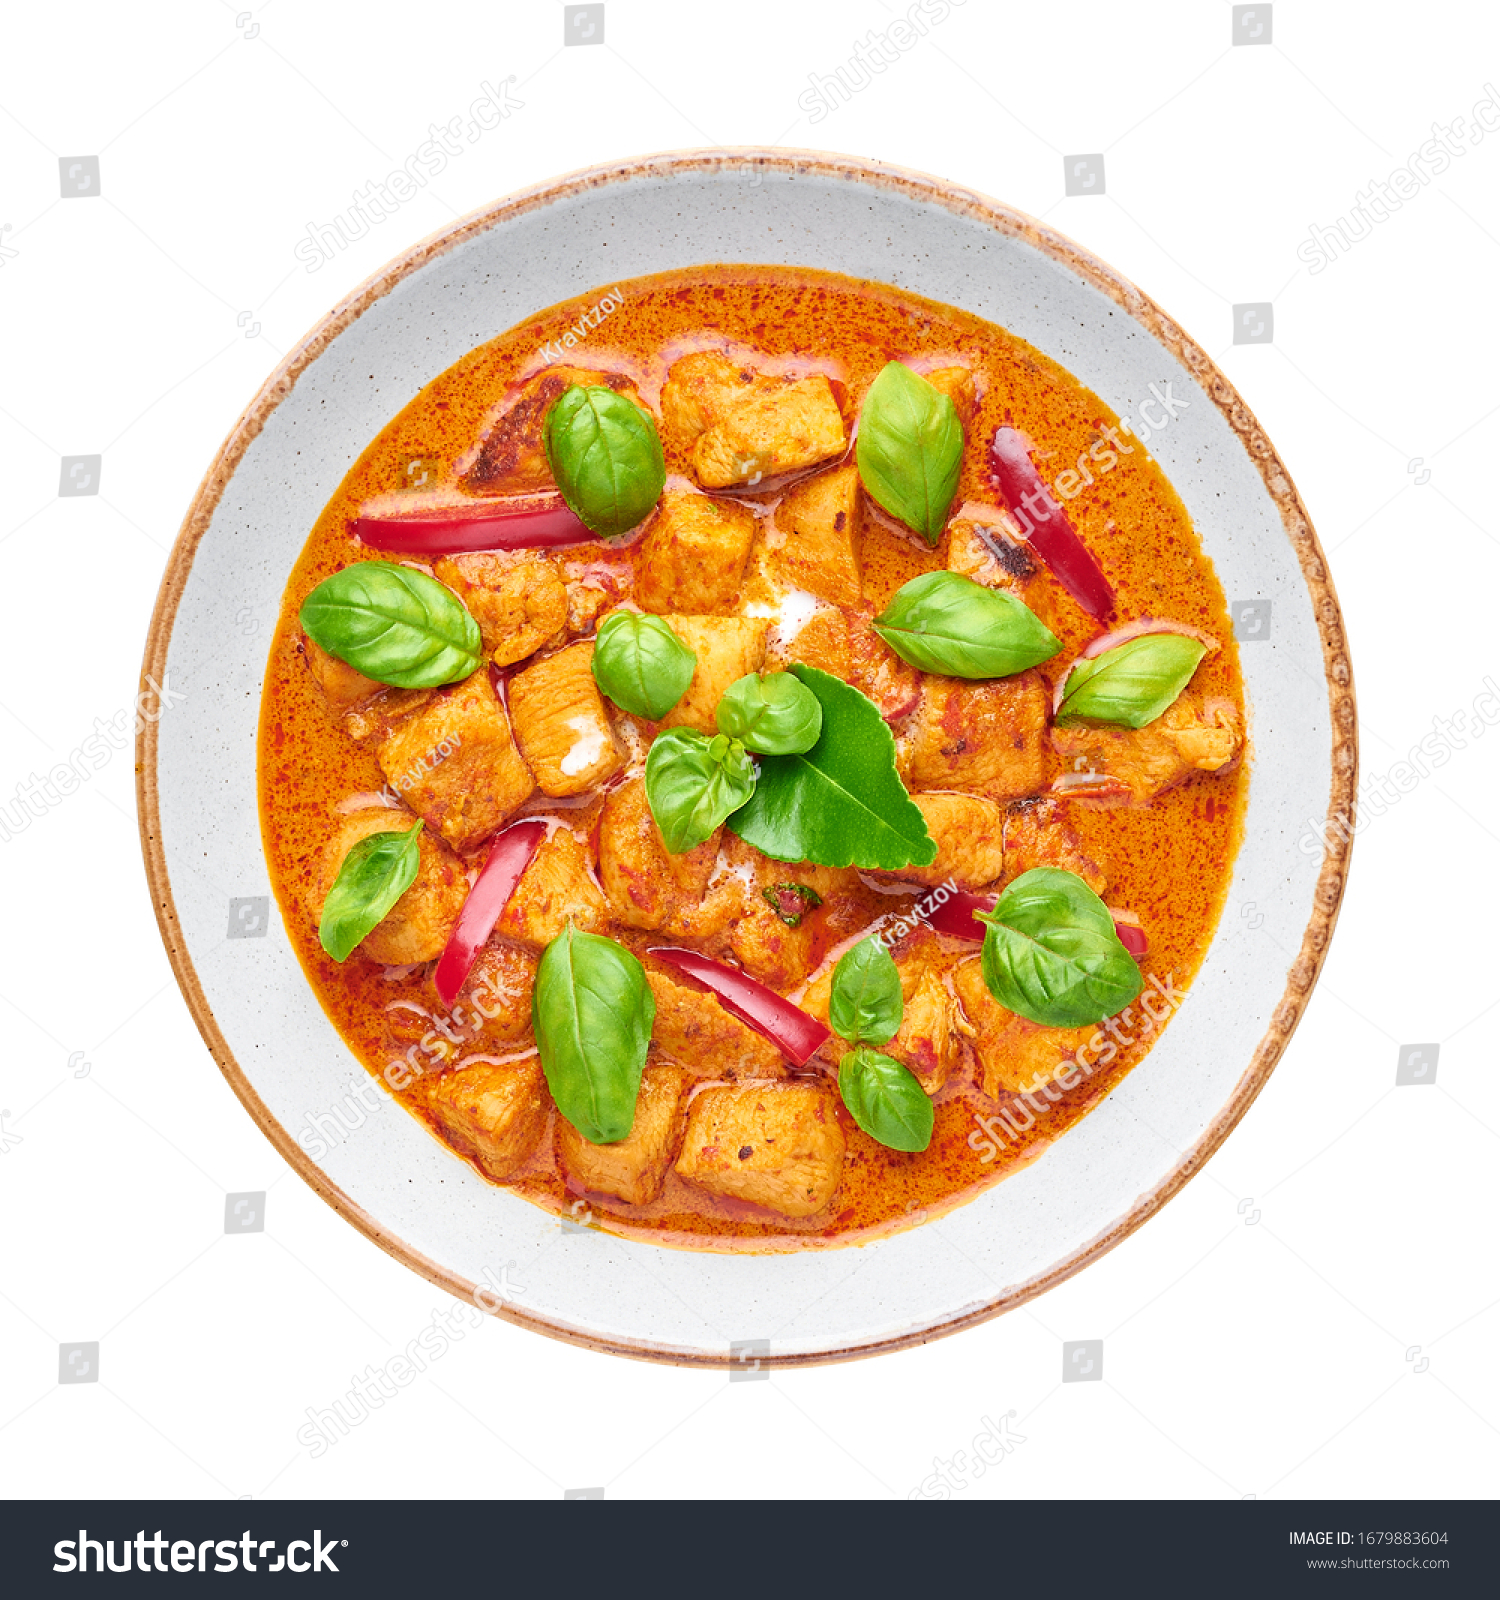 Thai Panang Chicken Curry isolated on white background. Phanaeng Curry is thai cuisine dish with chicken, kaffir lime leaves, red curry sauce and vegetables. Thai food. Thailand meal #1679883604